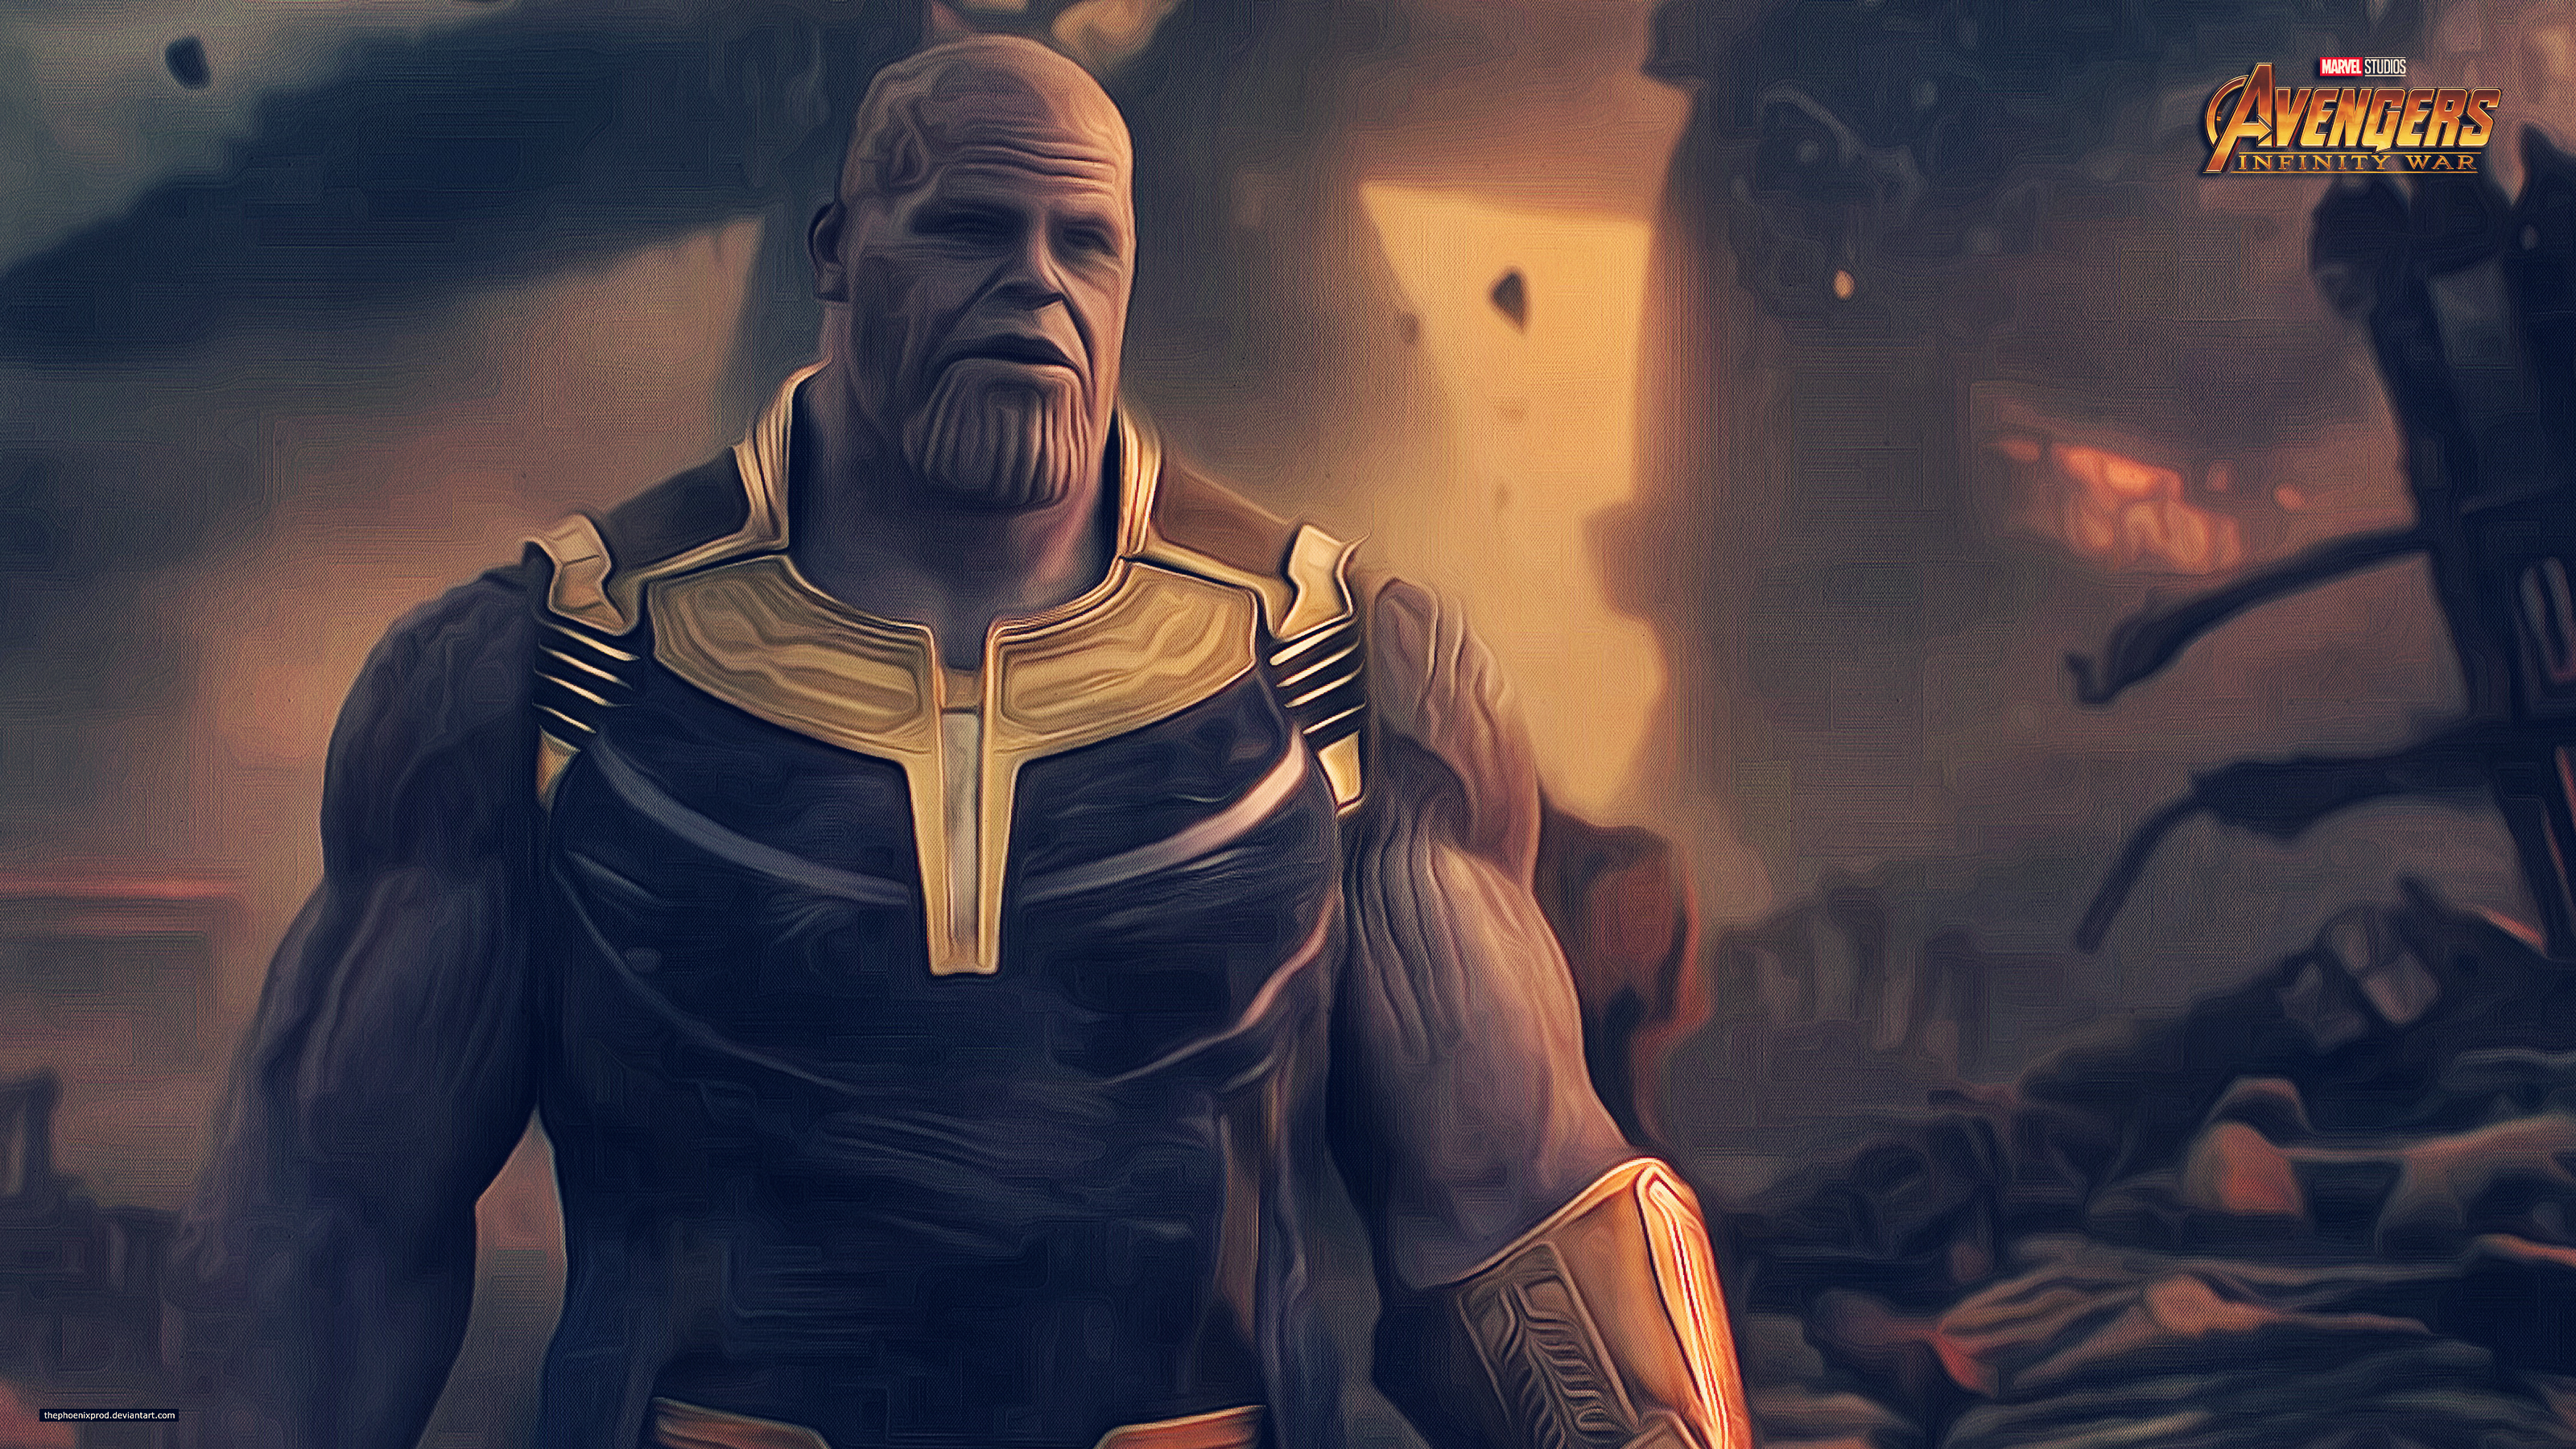 Thanos 2018 Wallpapers